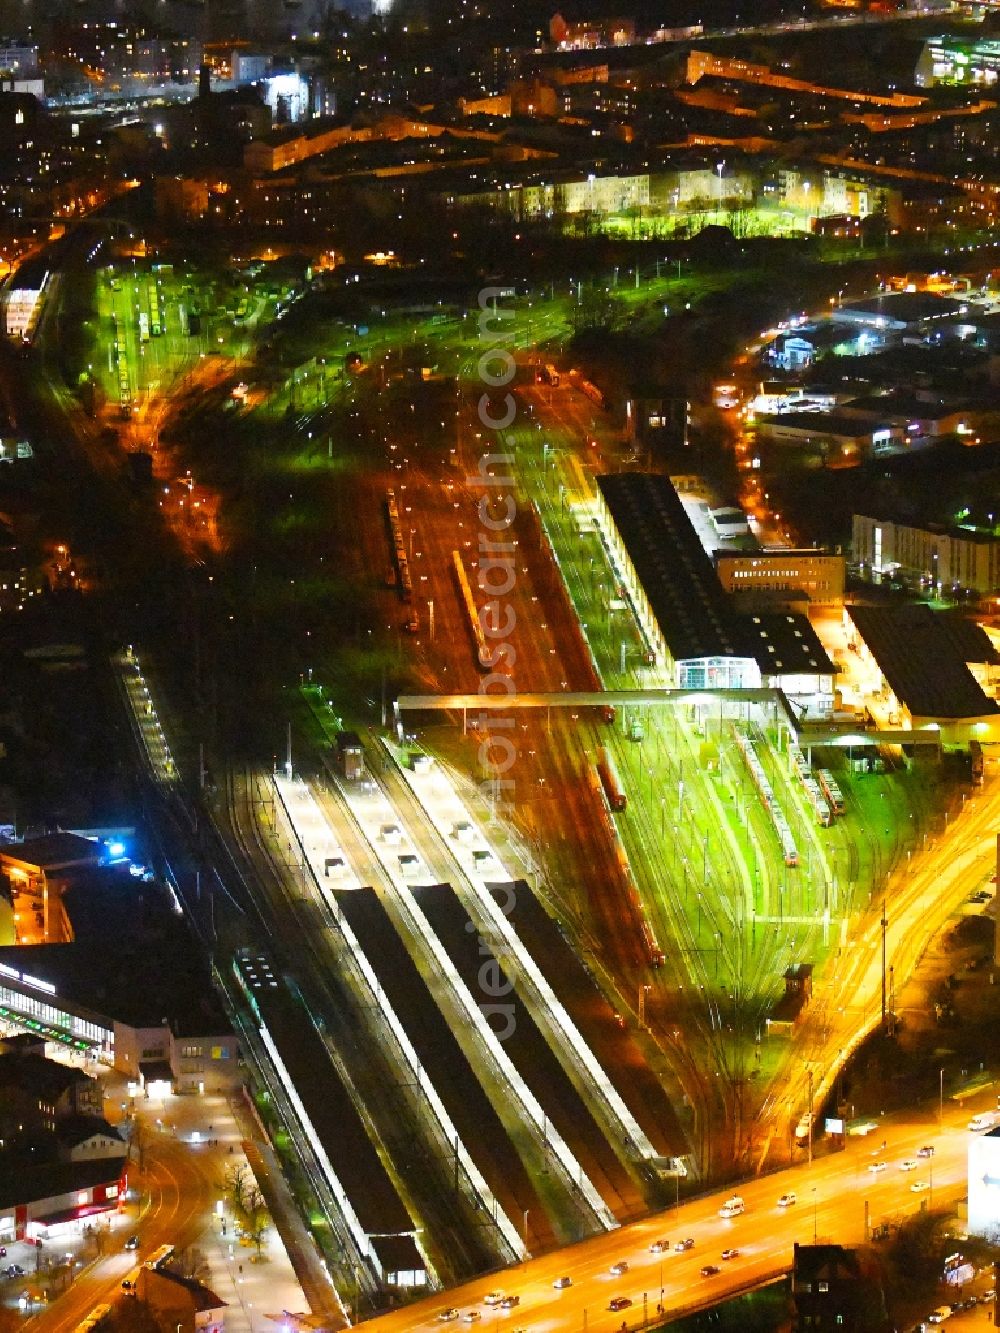 Berlin at night from above - Night lighting Station building and track systems of the S-Bahn station Berlin - Lichtenberg in the district Lichtenberg in Berlin, Germany